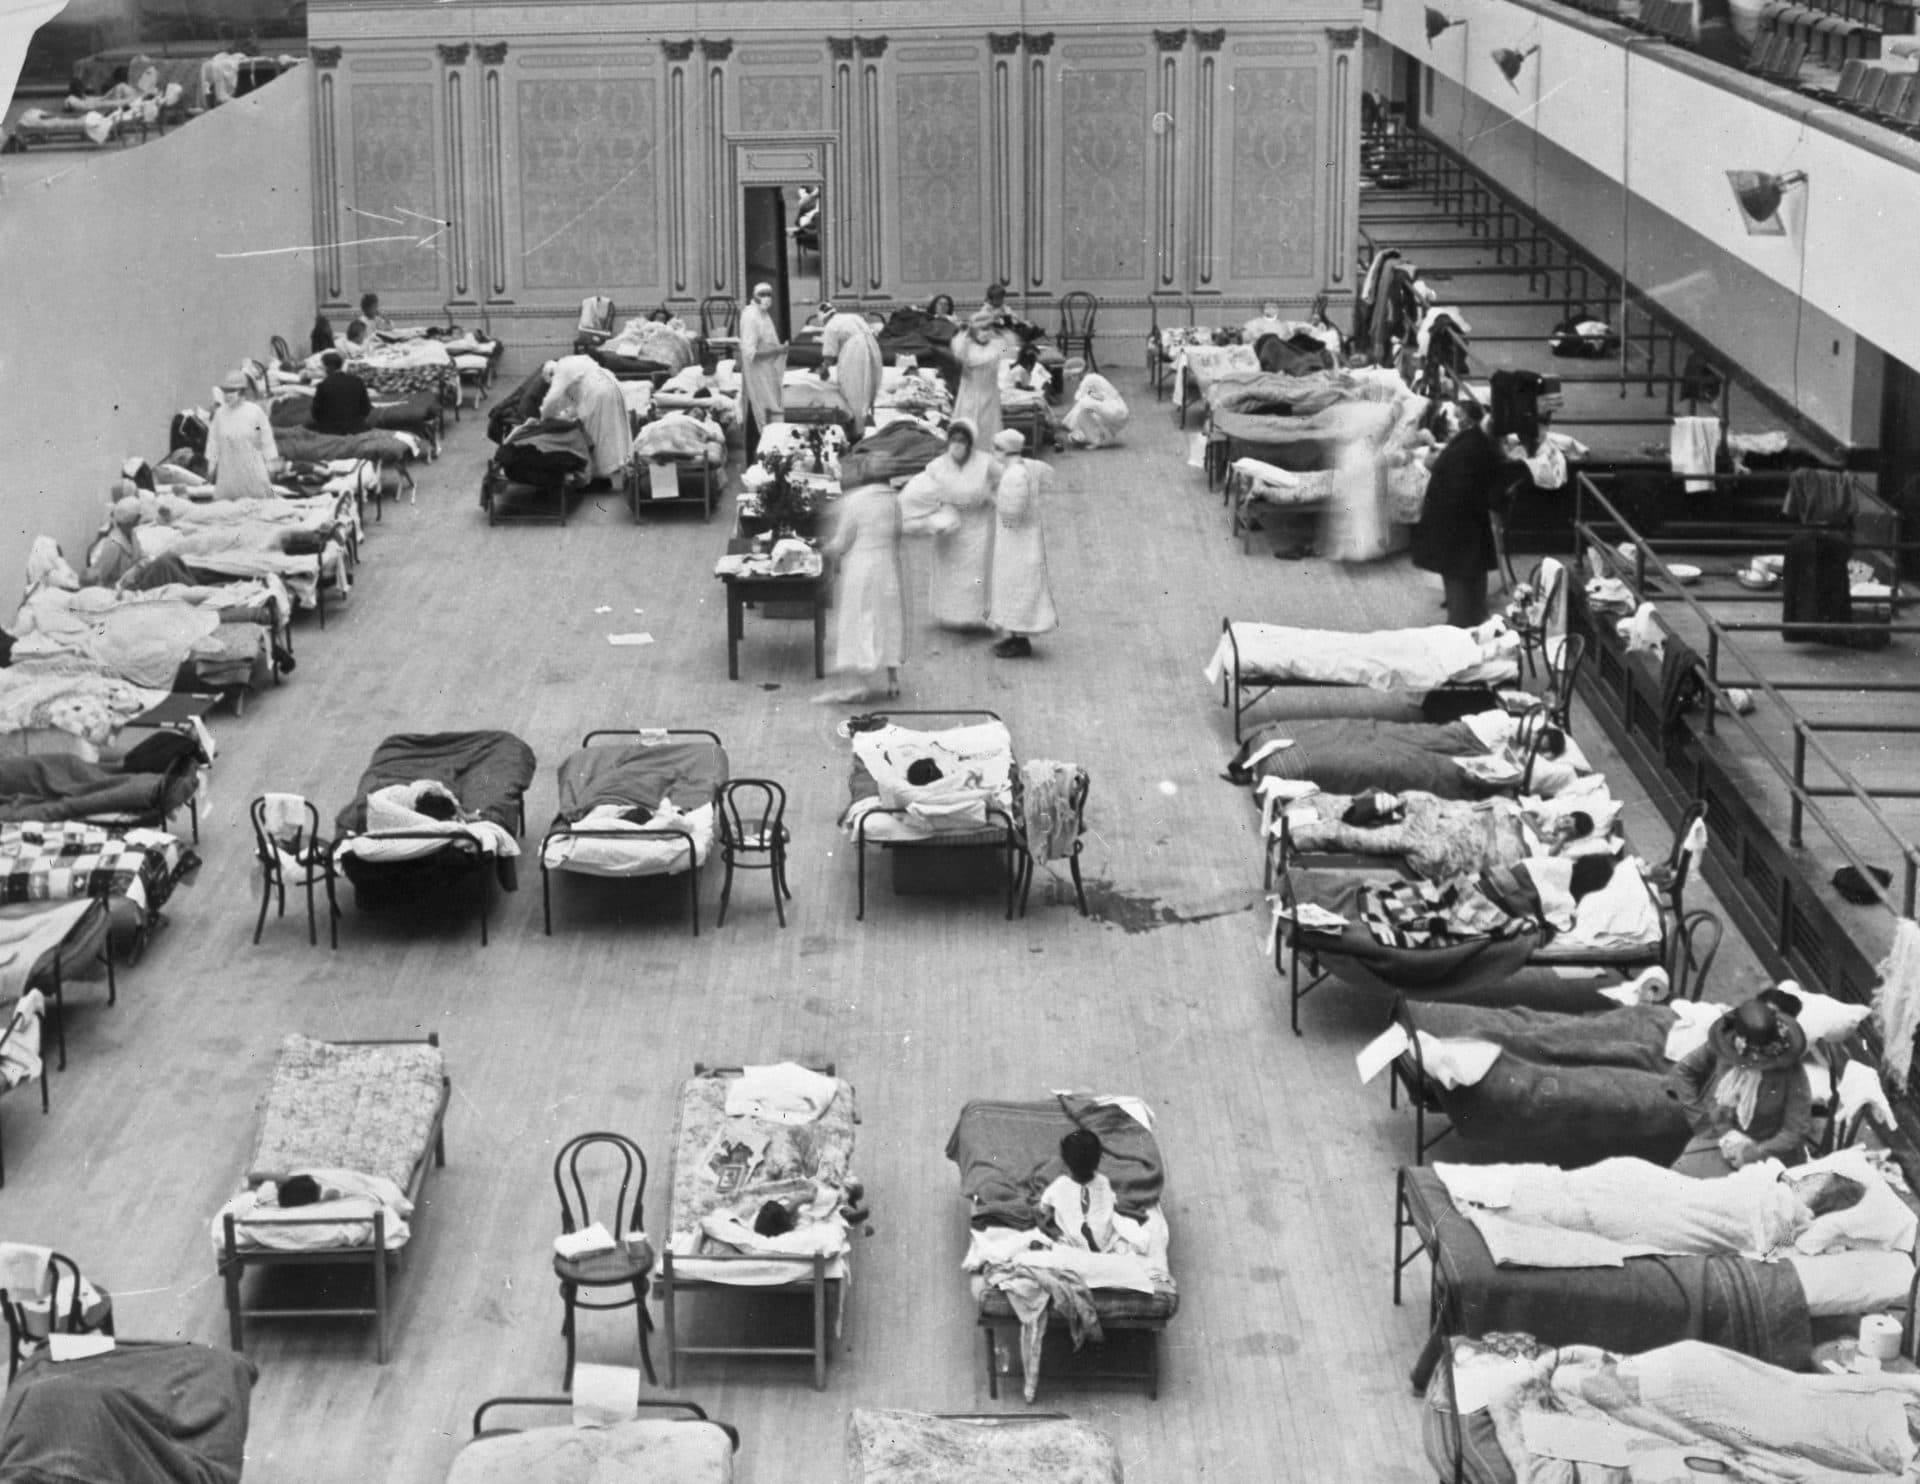 Volunteer nurses from the American Red Cross tend to influenza patients in the Oakland Municipal Auditorium, used as a temporary hospital in 1918-1919. (Edward A. &quot;Doc&quot; Rogers/Library of Congress via AP)